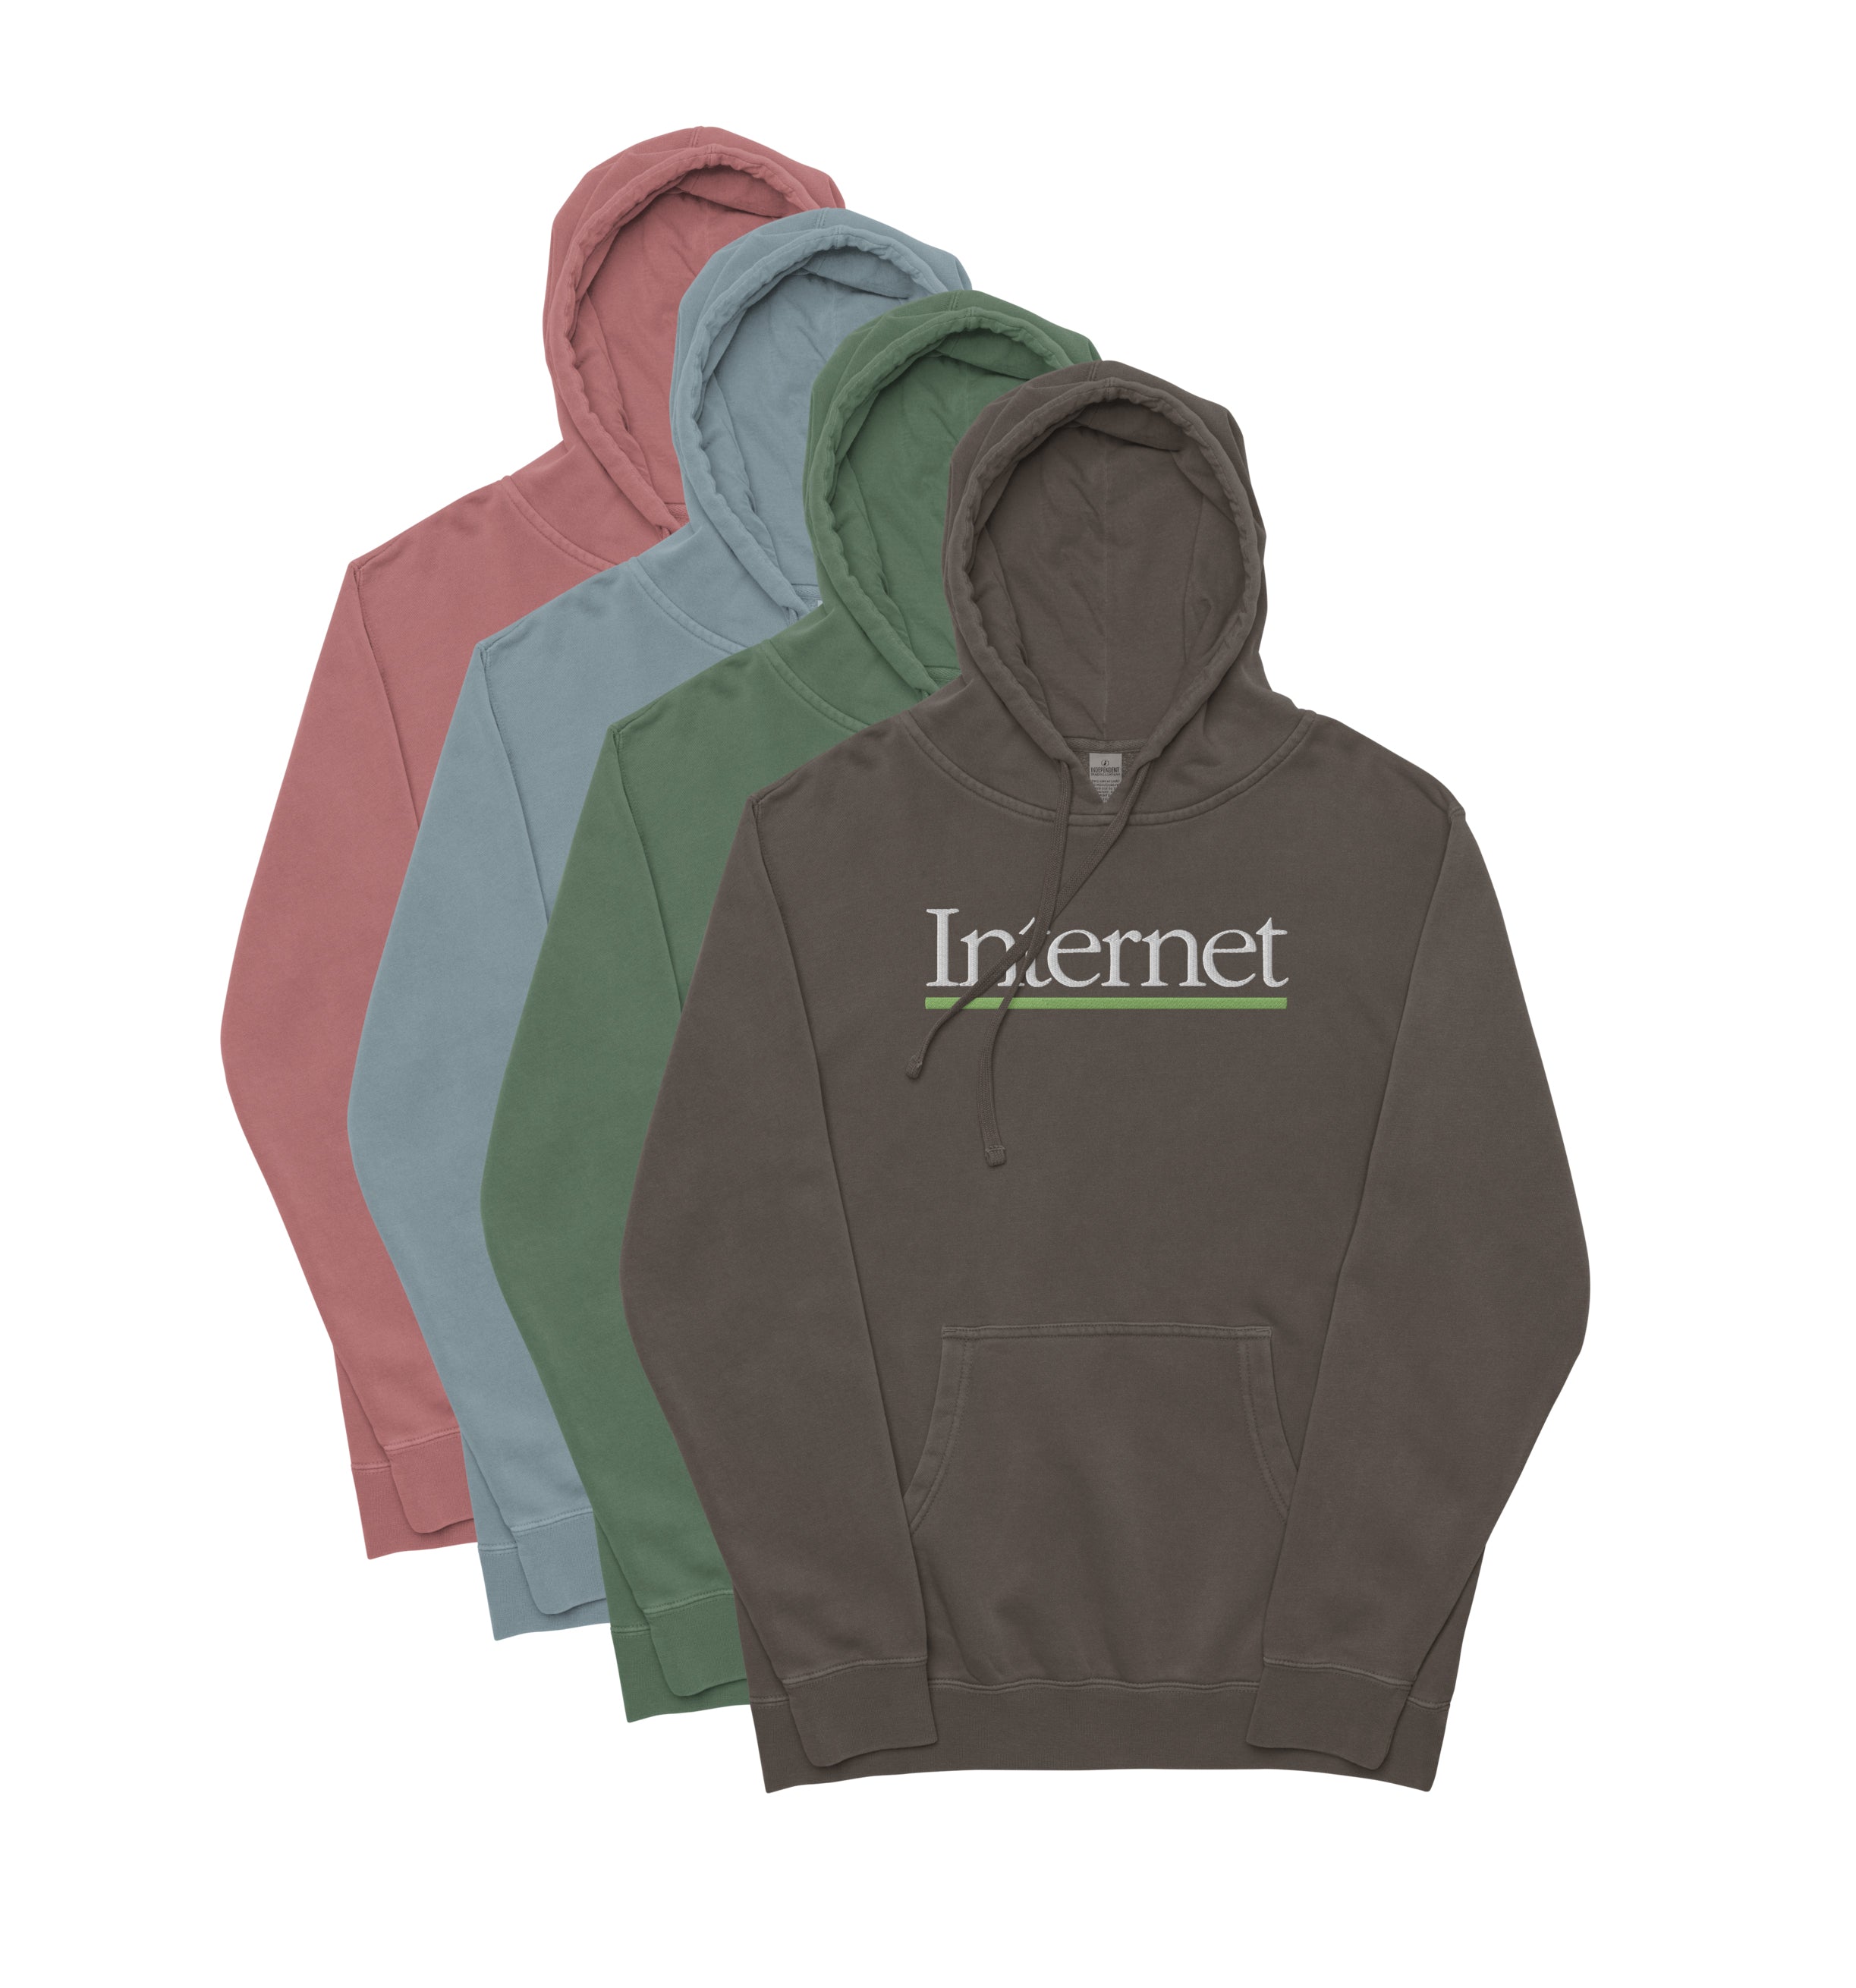 Internet embroidered pigment-dyed hoodie